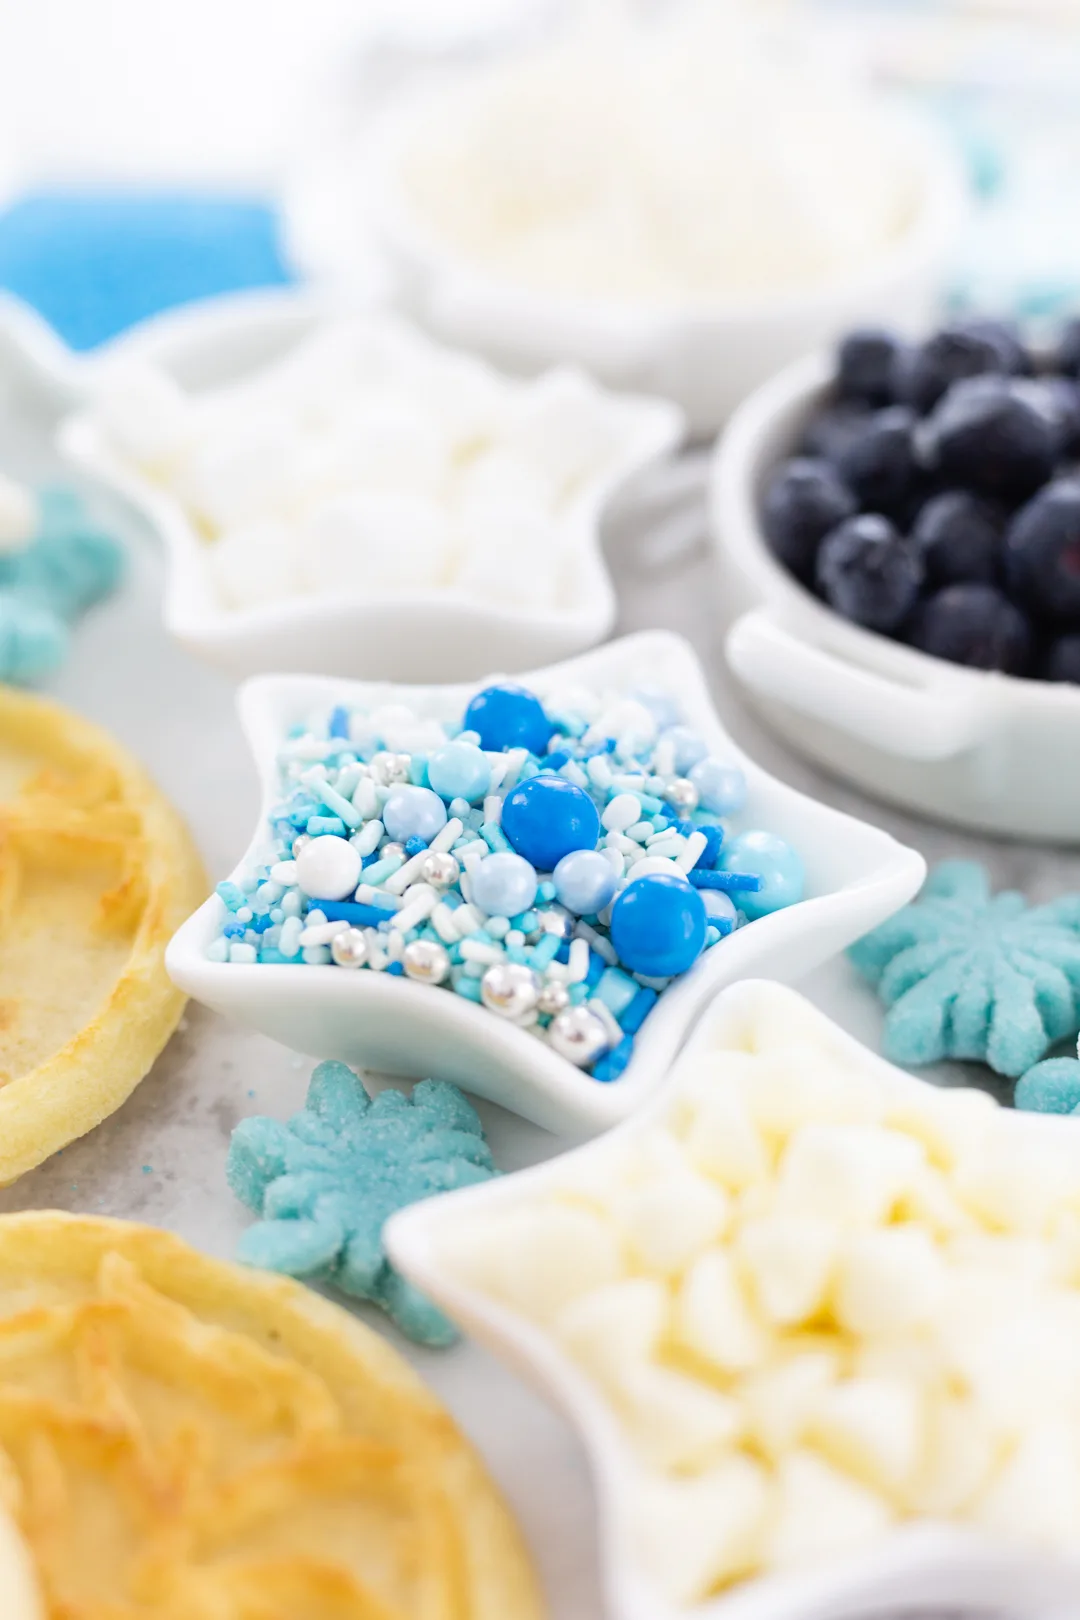 pretty frozen movie or cinderella inspired sprinkle mix with shades of blue, white and silver